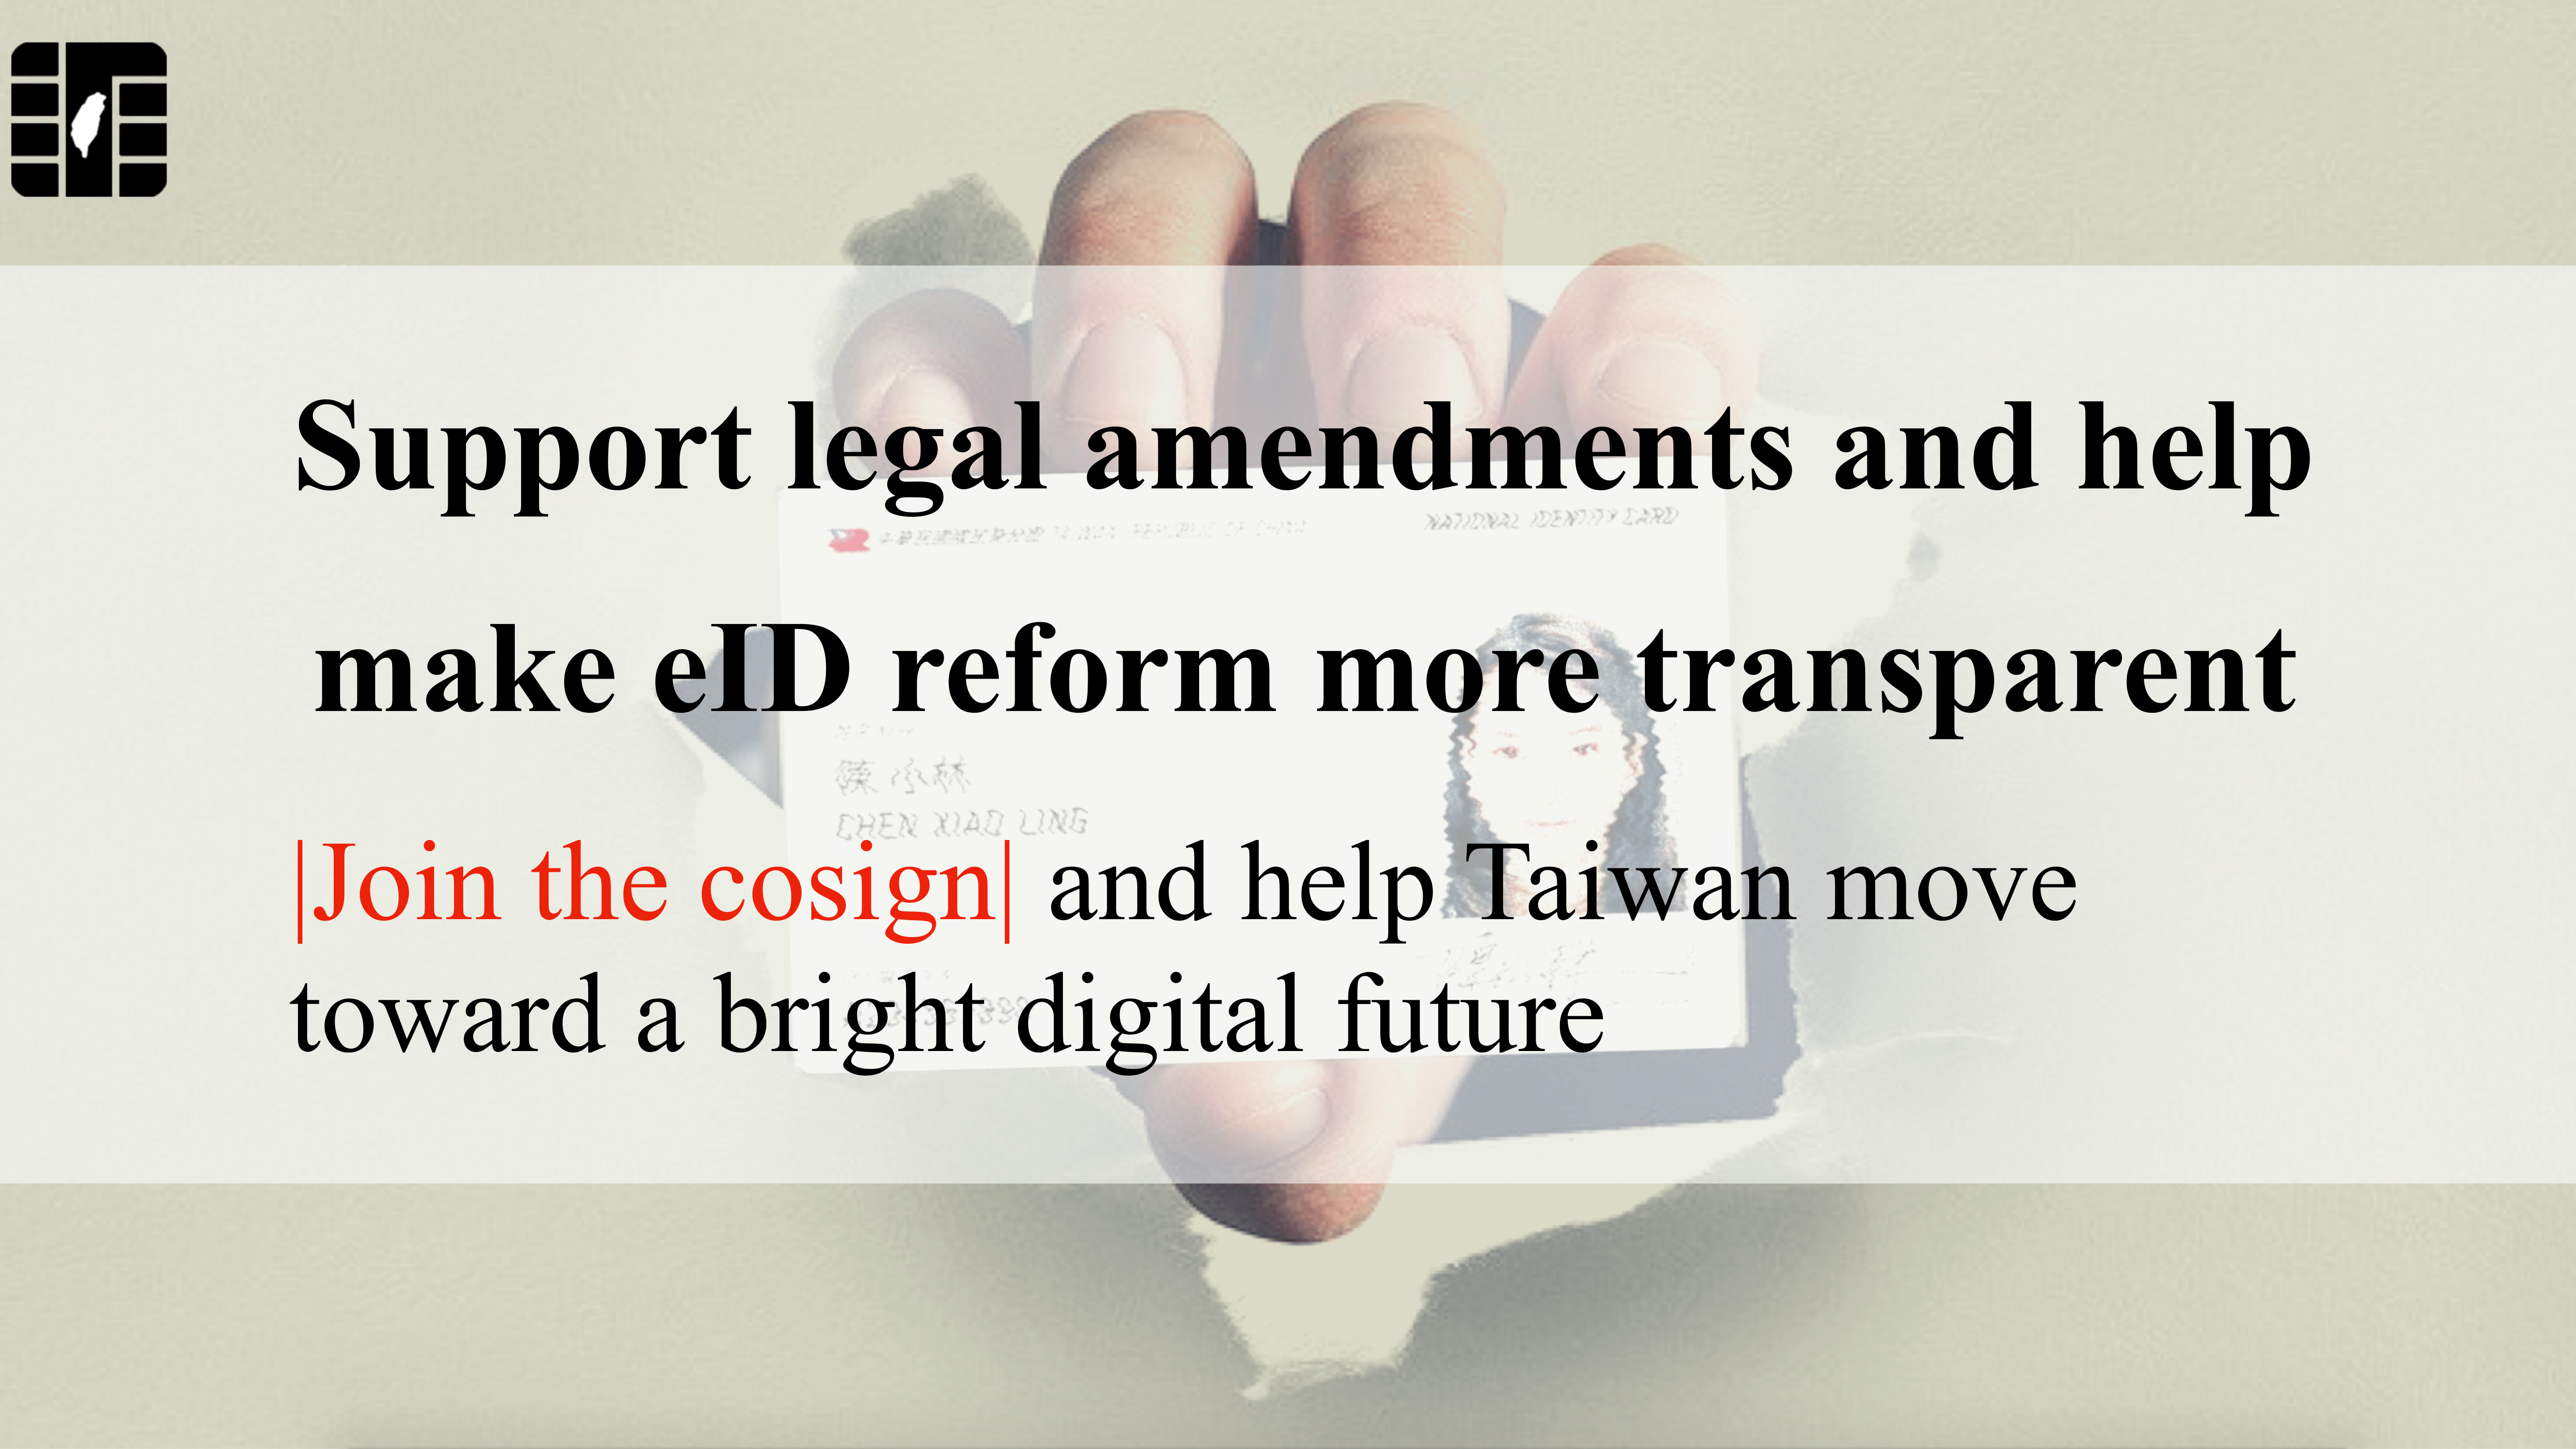 Visual identity image for 'Cosignatory - amend the law and make eID reform more transparent'